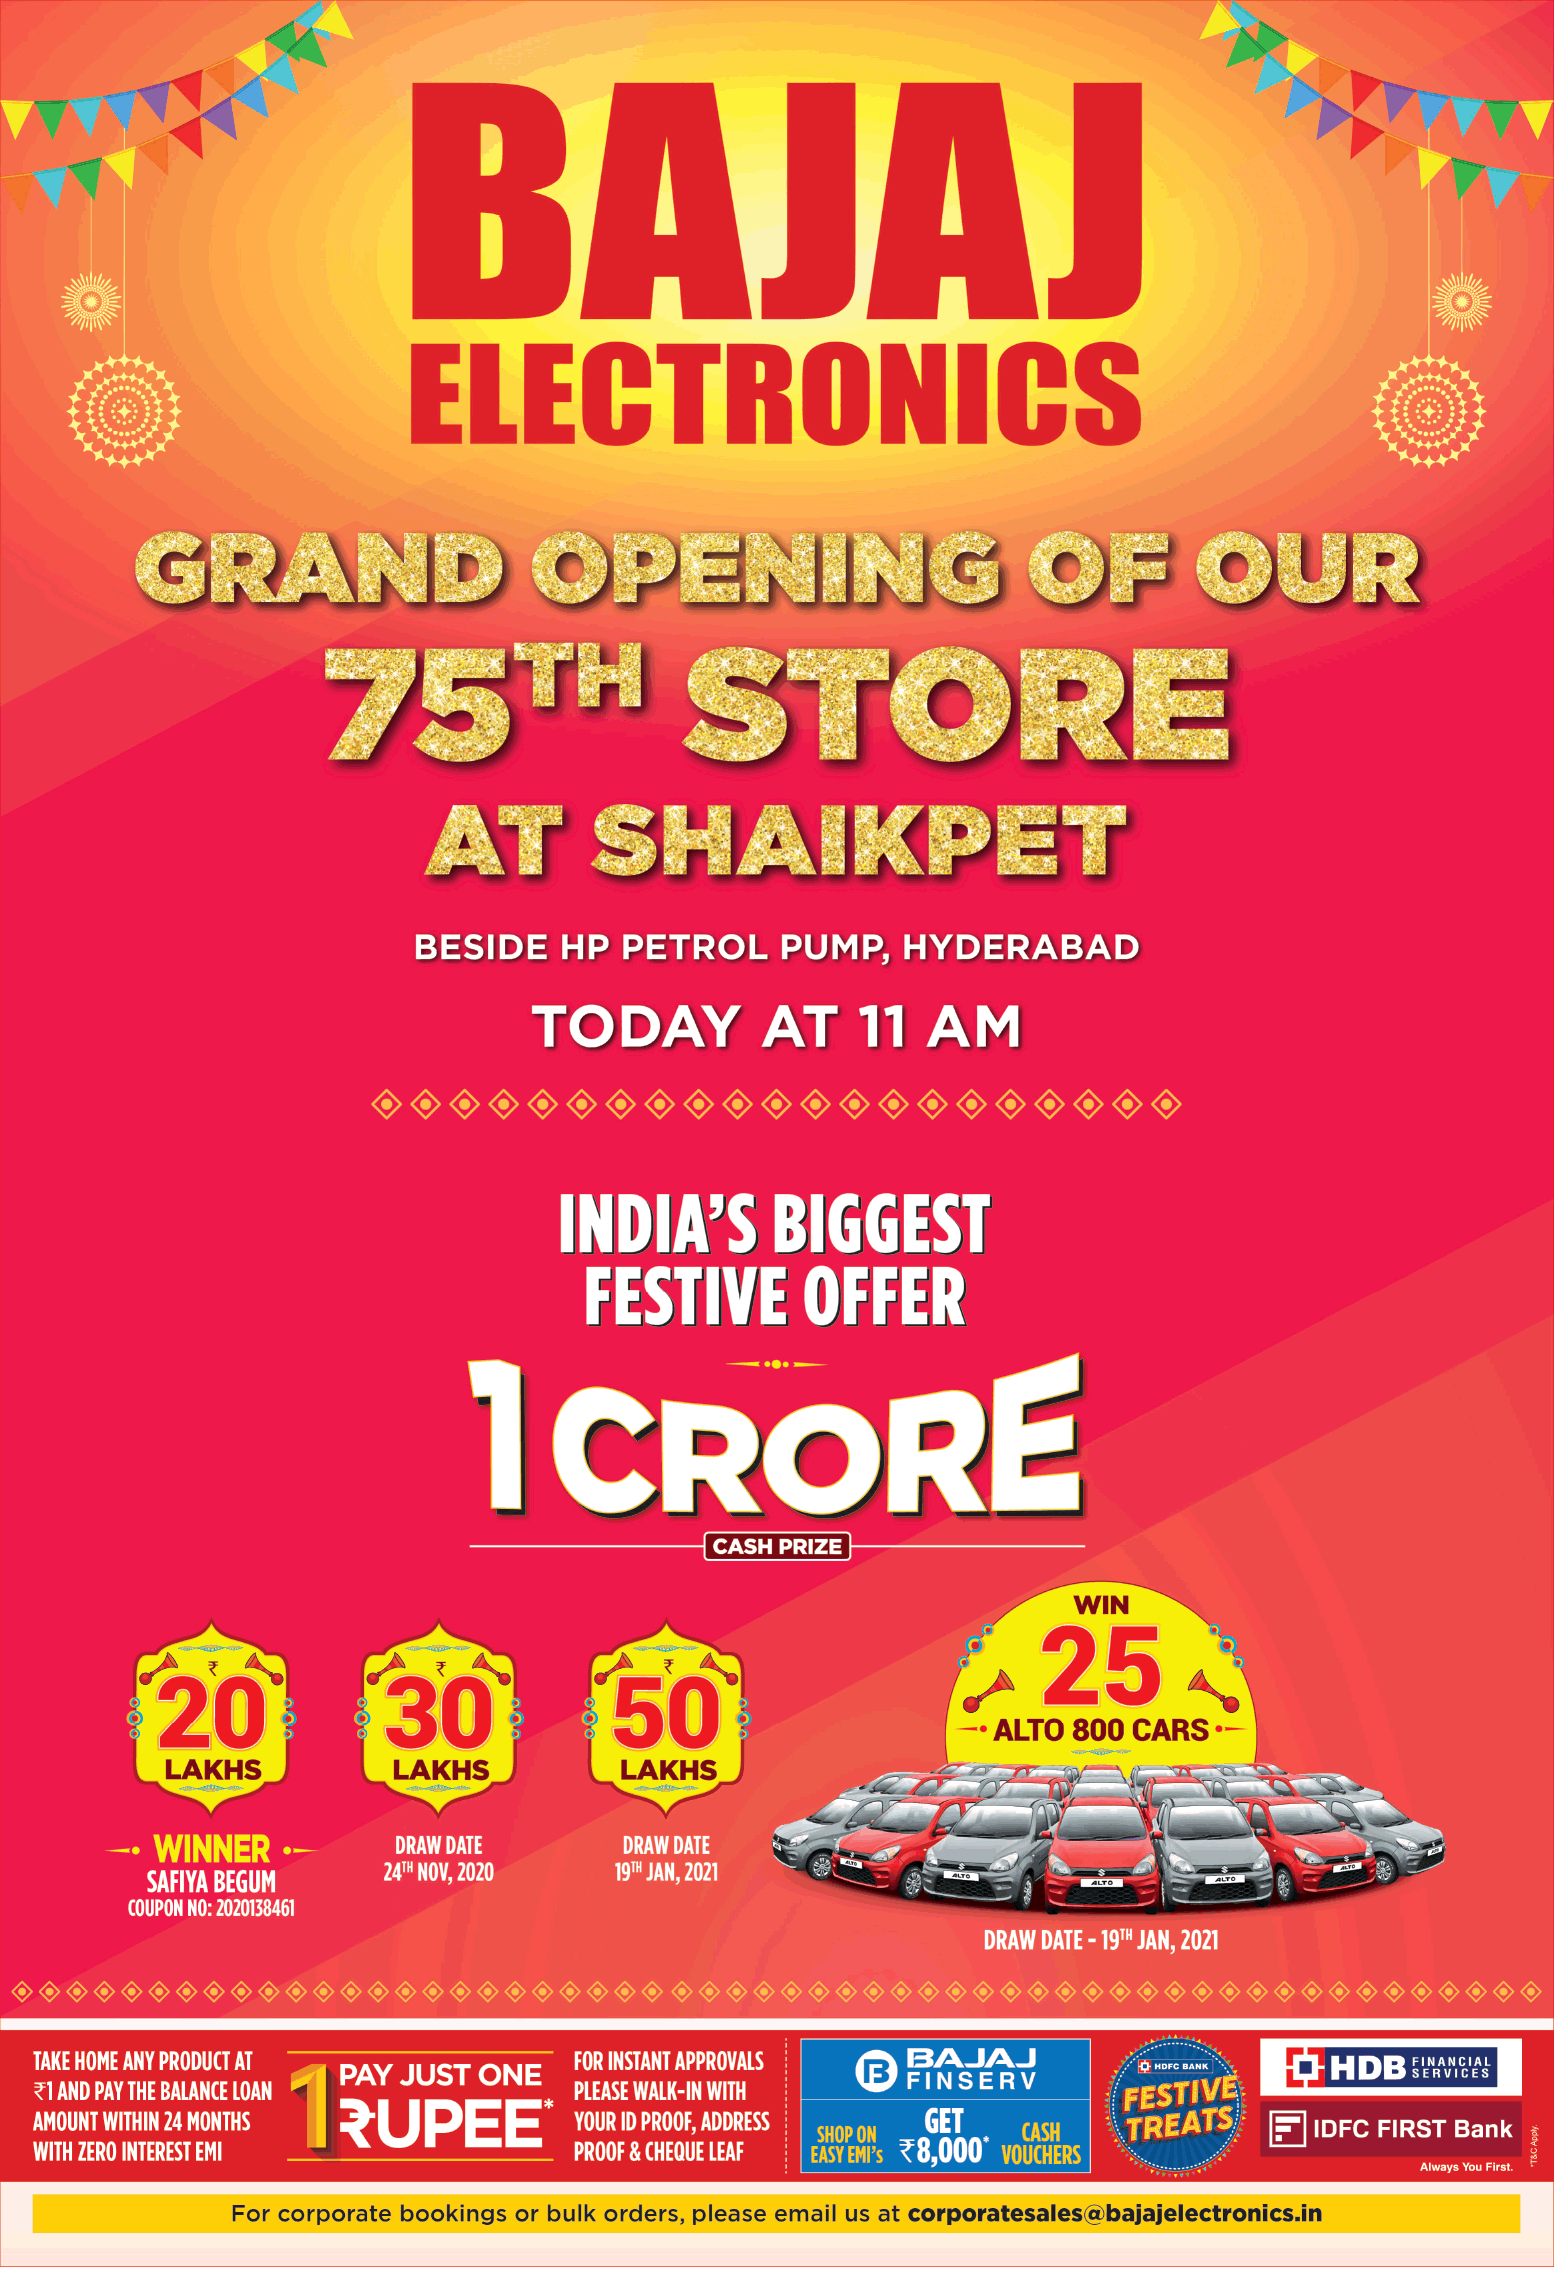 bajaj-electronics-grand-opening-of-75th-store-at-shaikpet-ad-toi-hyderabad-31-10-2020